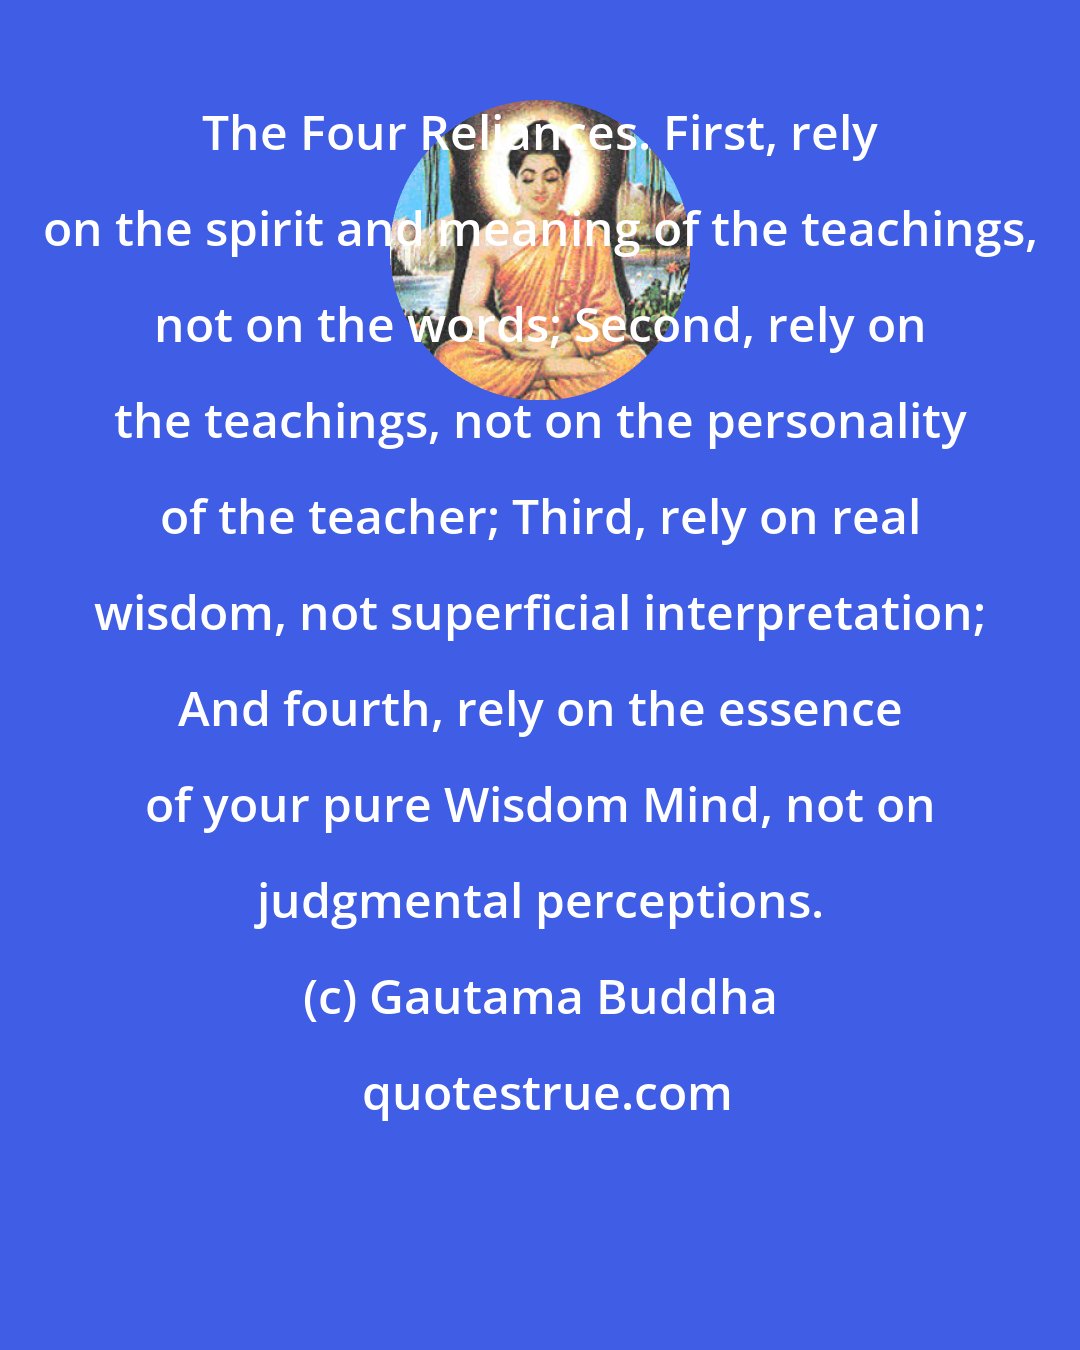 Gautama Buddha: The Four Reliances. First, rely on the spirit and meaning of the teachings, not on the words; Second, rely on the teachings, not on the personality of the teacher; Third, rely on real wisdom, not superficial interpretation; And fourth, rely on the essence of your pure Wisdom Mind, not on judgmental perceptions.